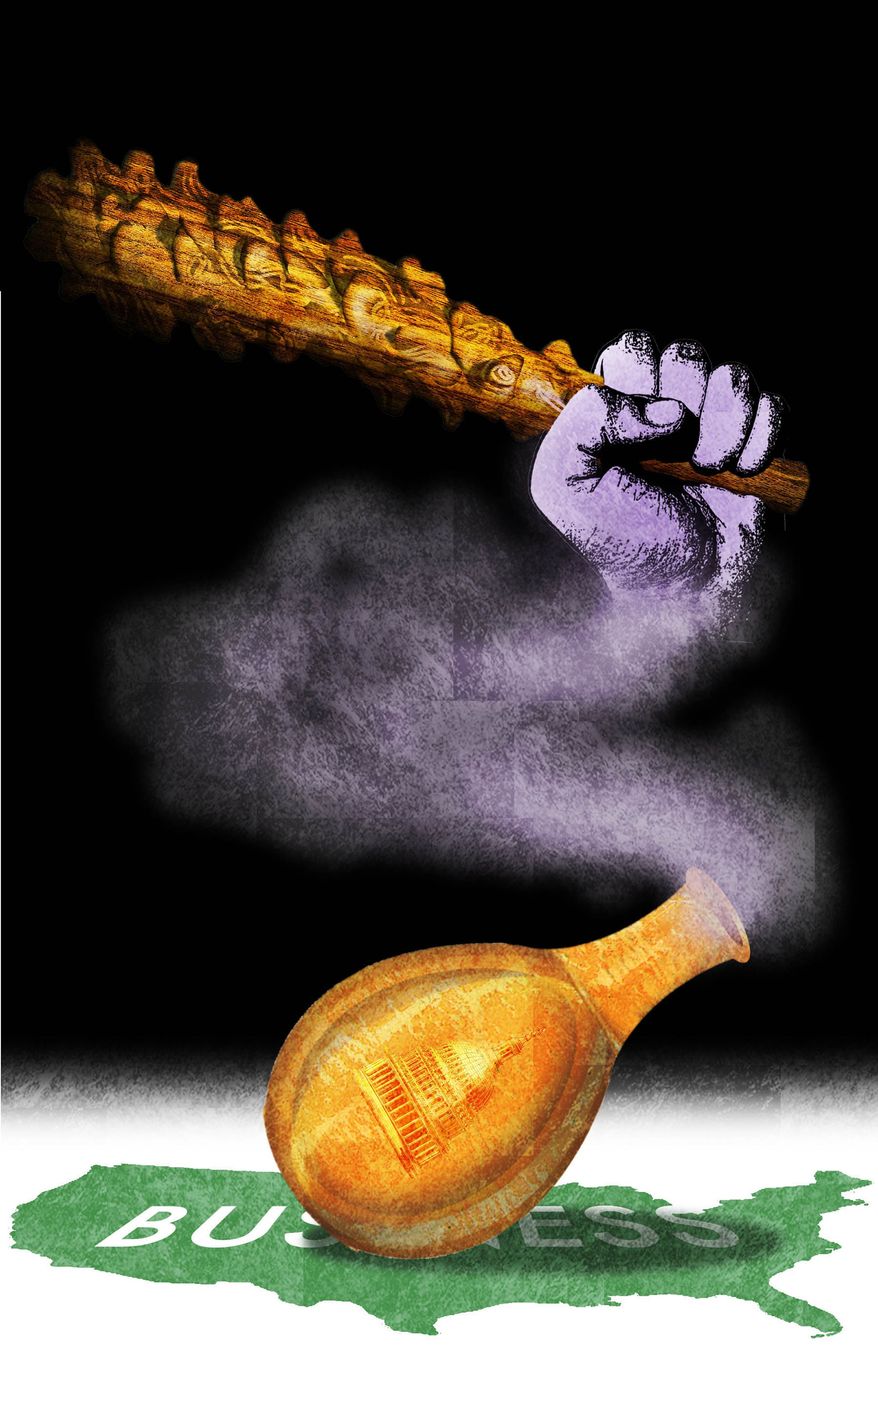 Illustration on the dangers of anti-trust regulation by Alexander Hunter/The Washington Times